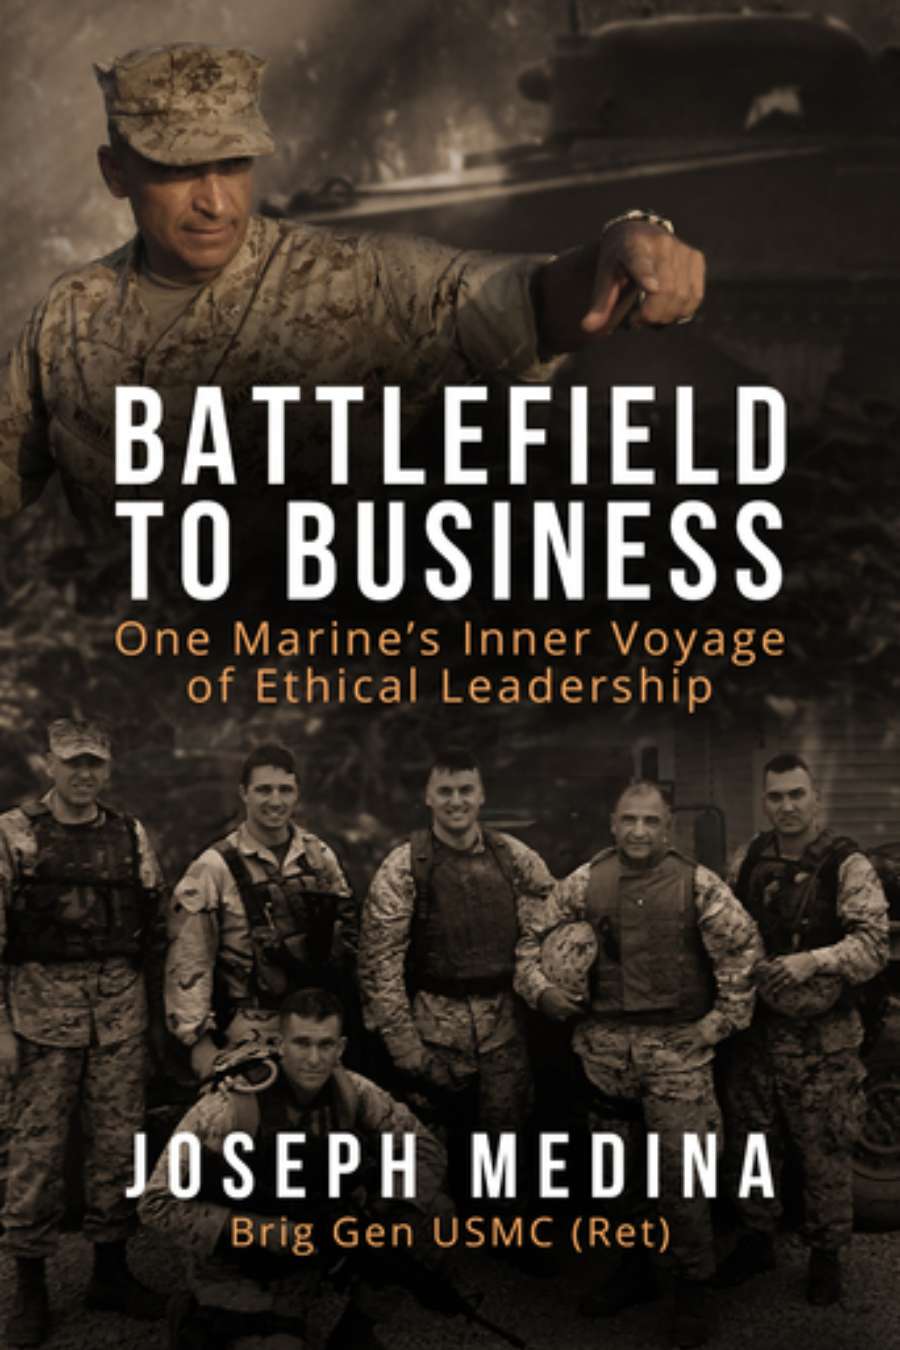 battlefield-to-business-one-marine-s-inner-voyage-of-ethical-leadership Image